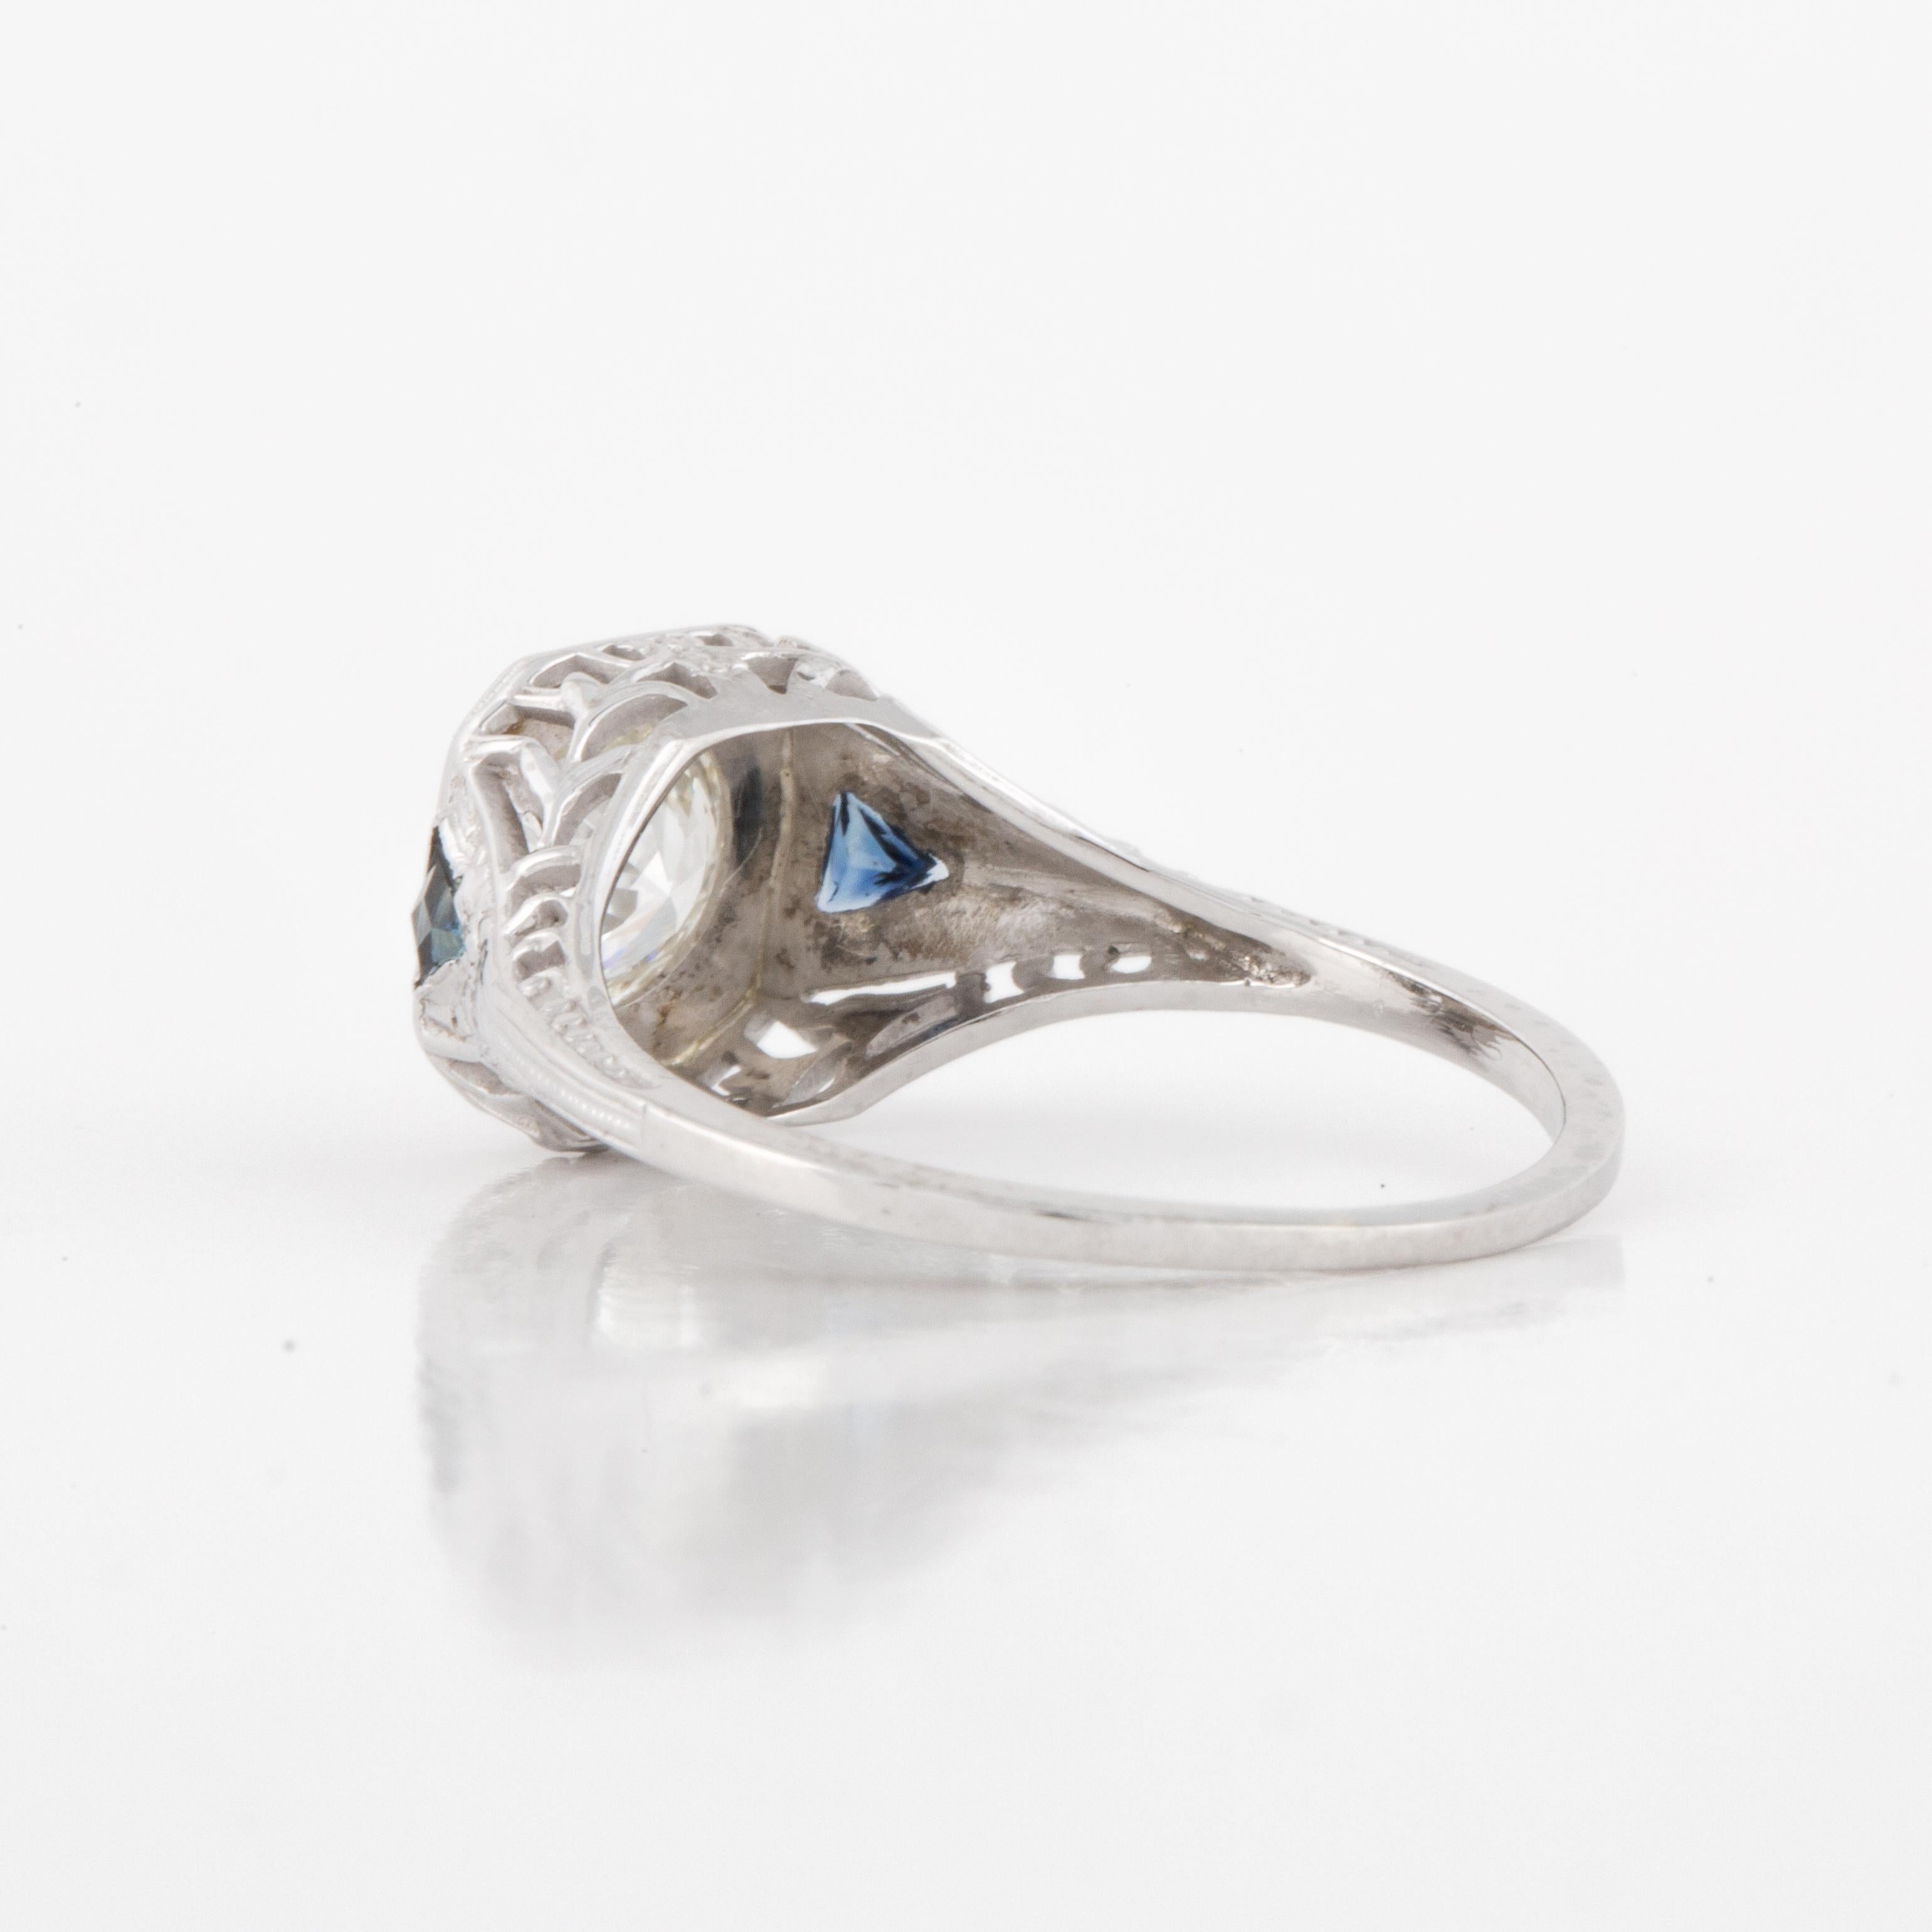 Mixed Cut Art Deco 18K White Gold Diamond Engagement Ring with Sapphire Accents